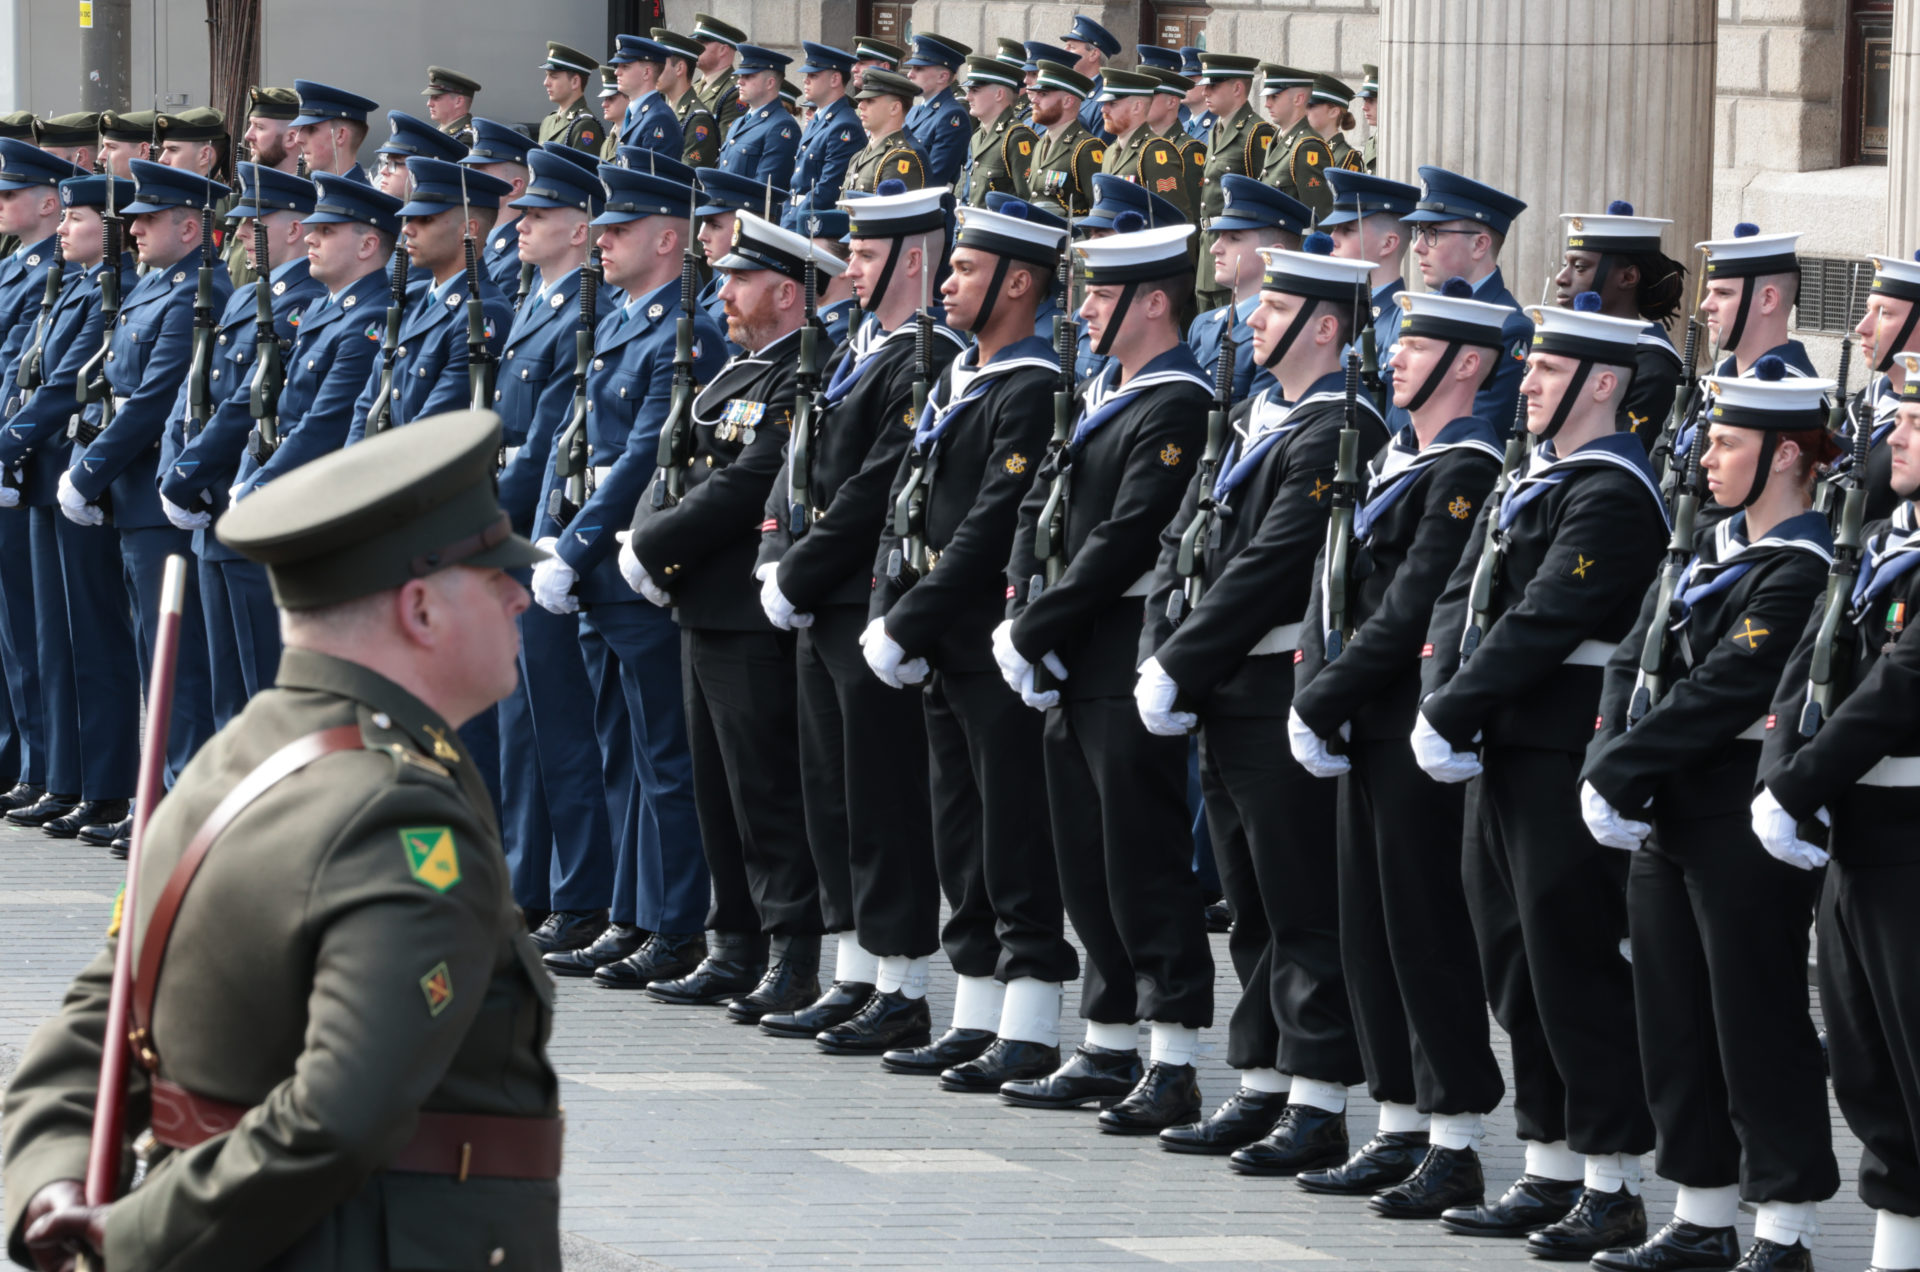 Defence Forces Personnel outside the GPO for the 108th anniversary of the 1916 Rising. Image: Leah Farrell / © RollingNews.ie